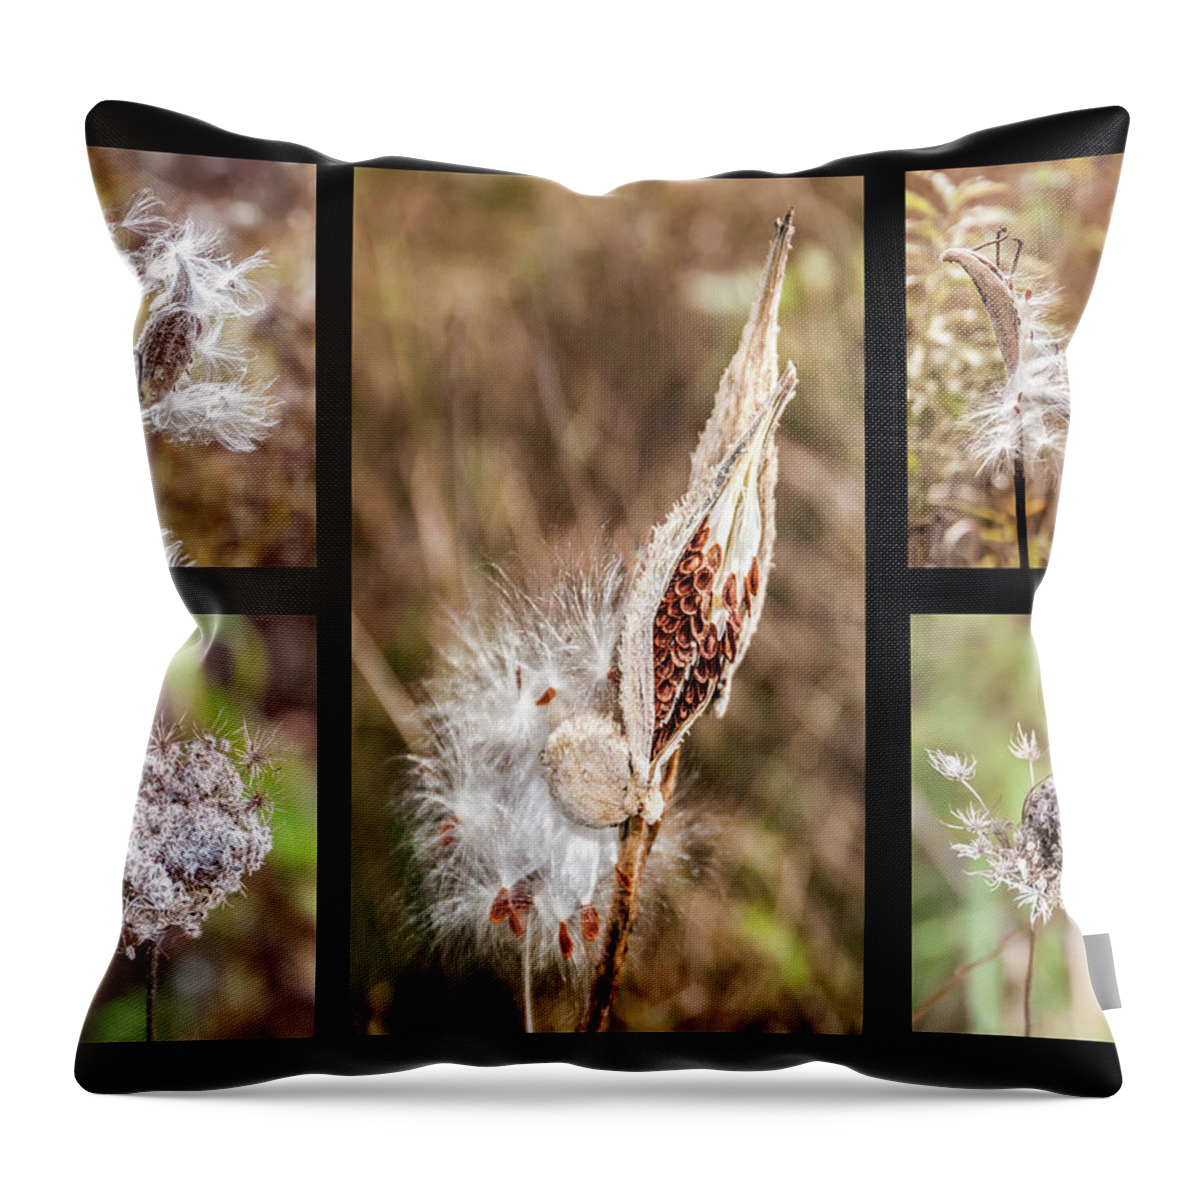 Seed Pods Throw Pillow featuring the photograph Seed Collage by Geraldine Alexander